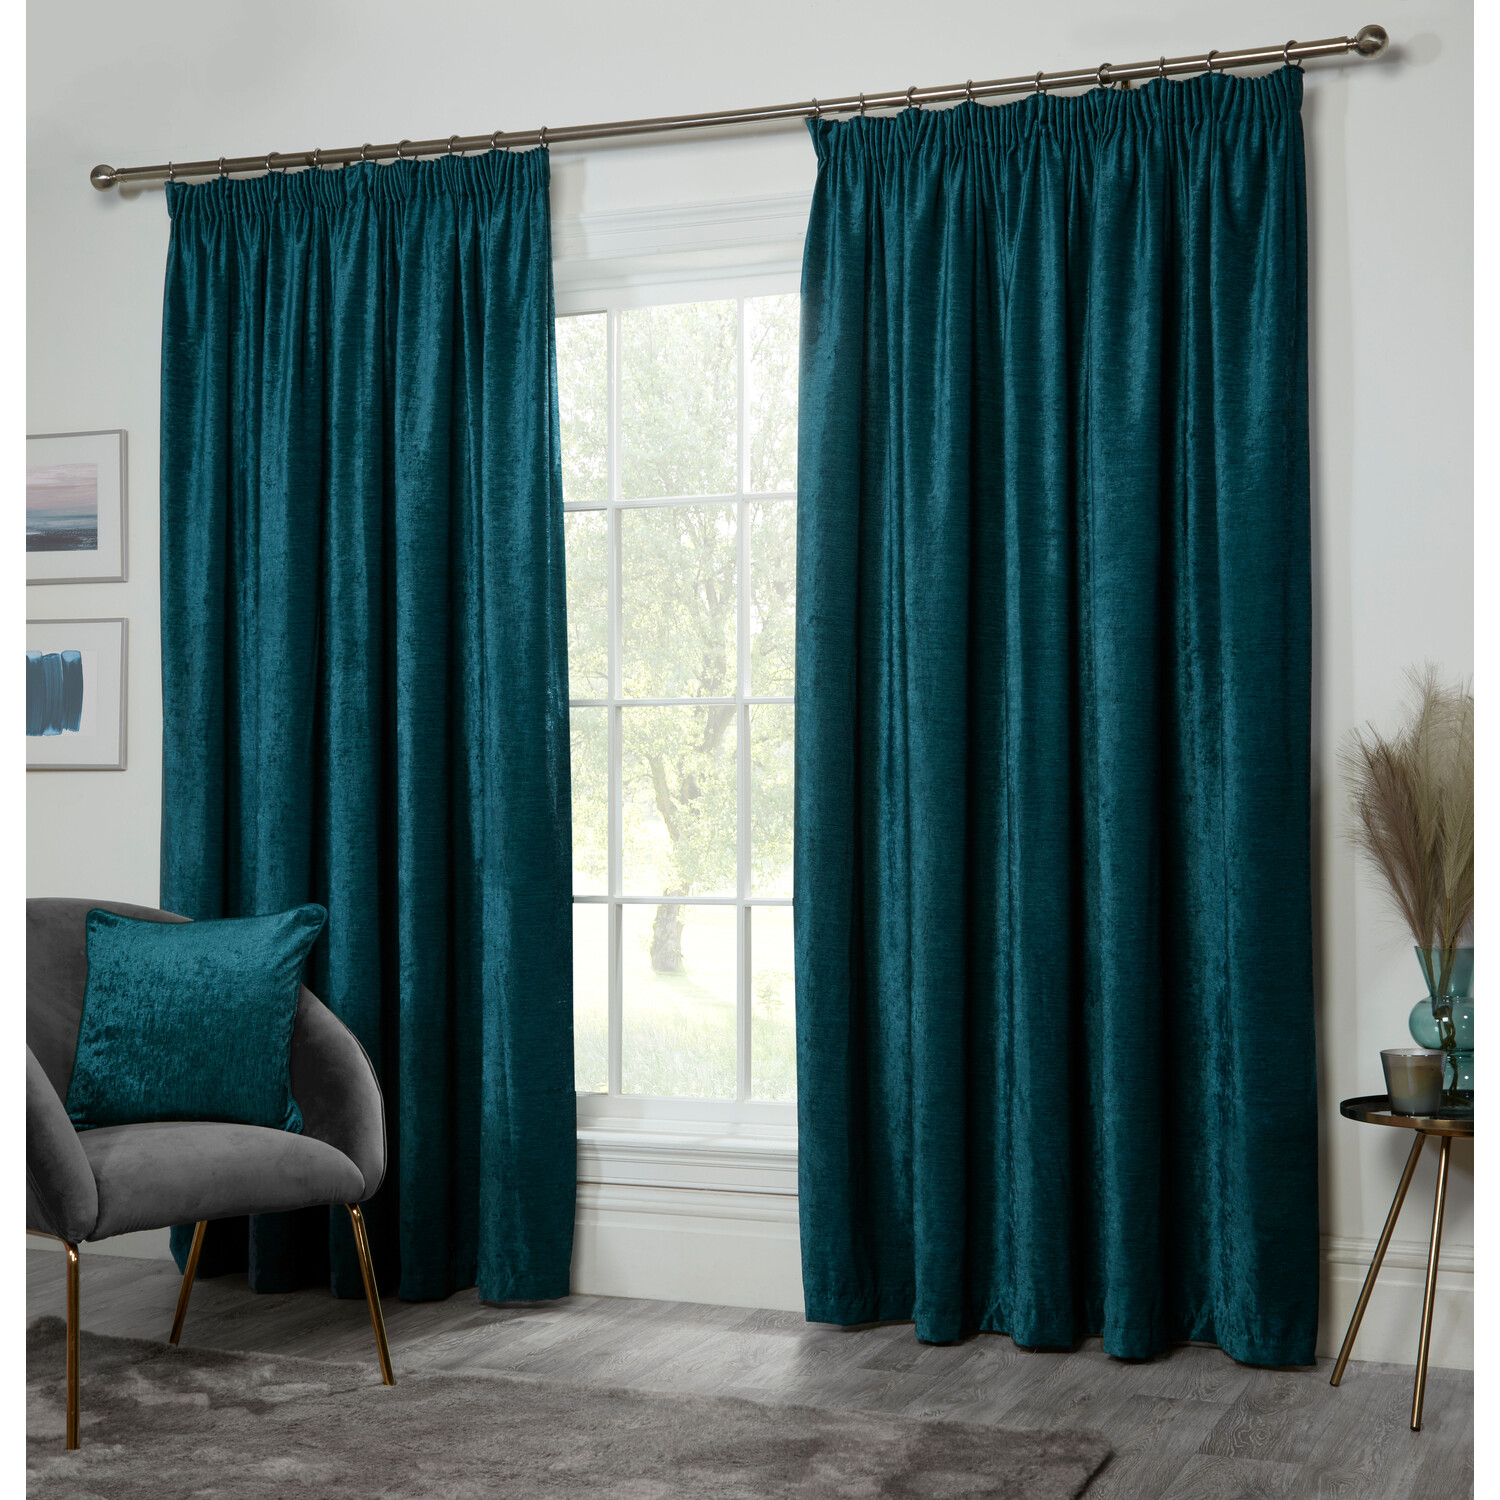 Divante Teal Chenille Taped Curtains 168 x 137cm Image 2